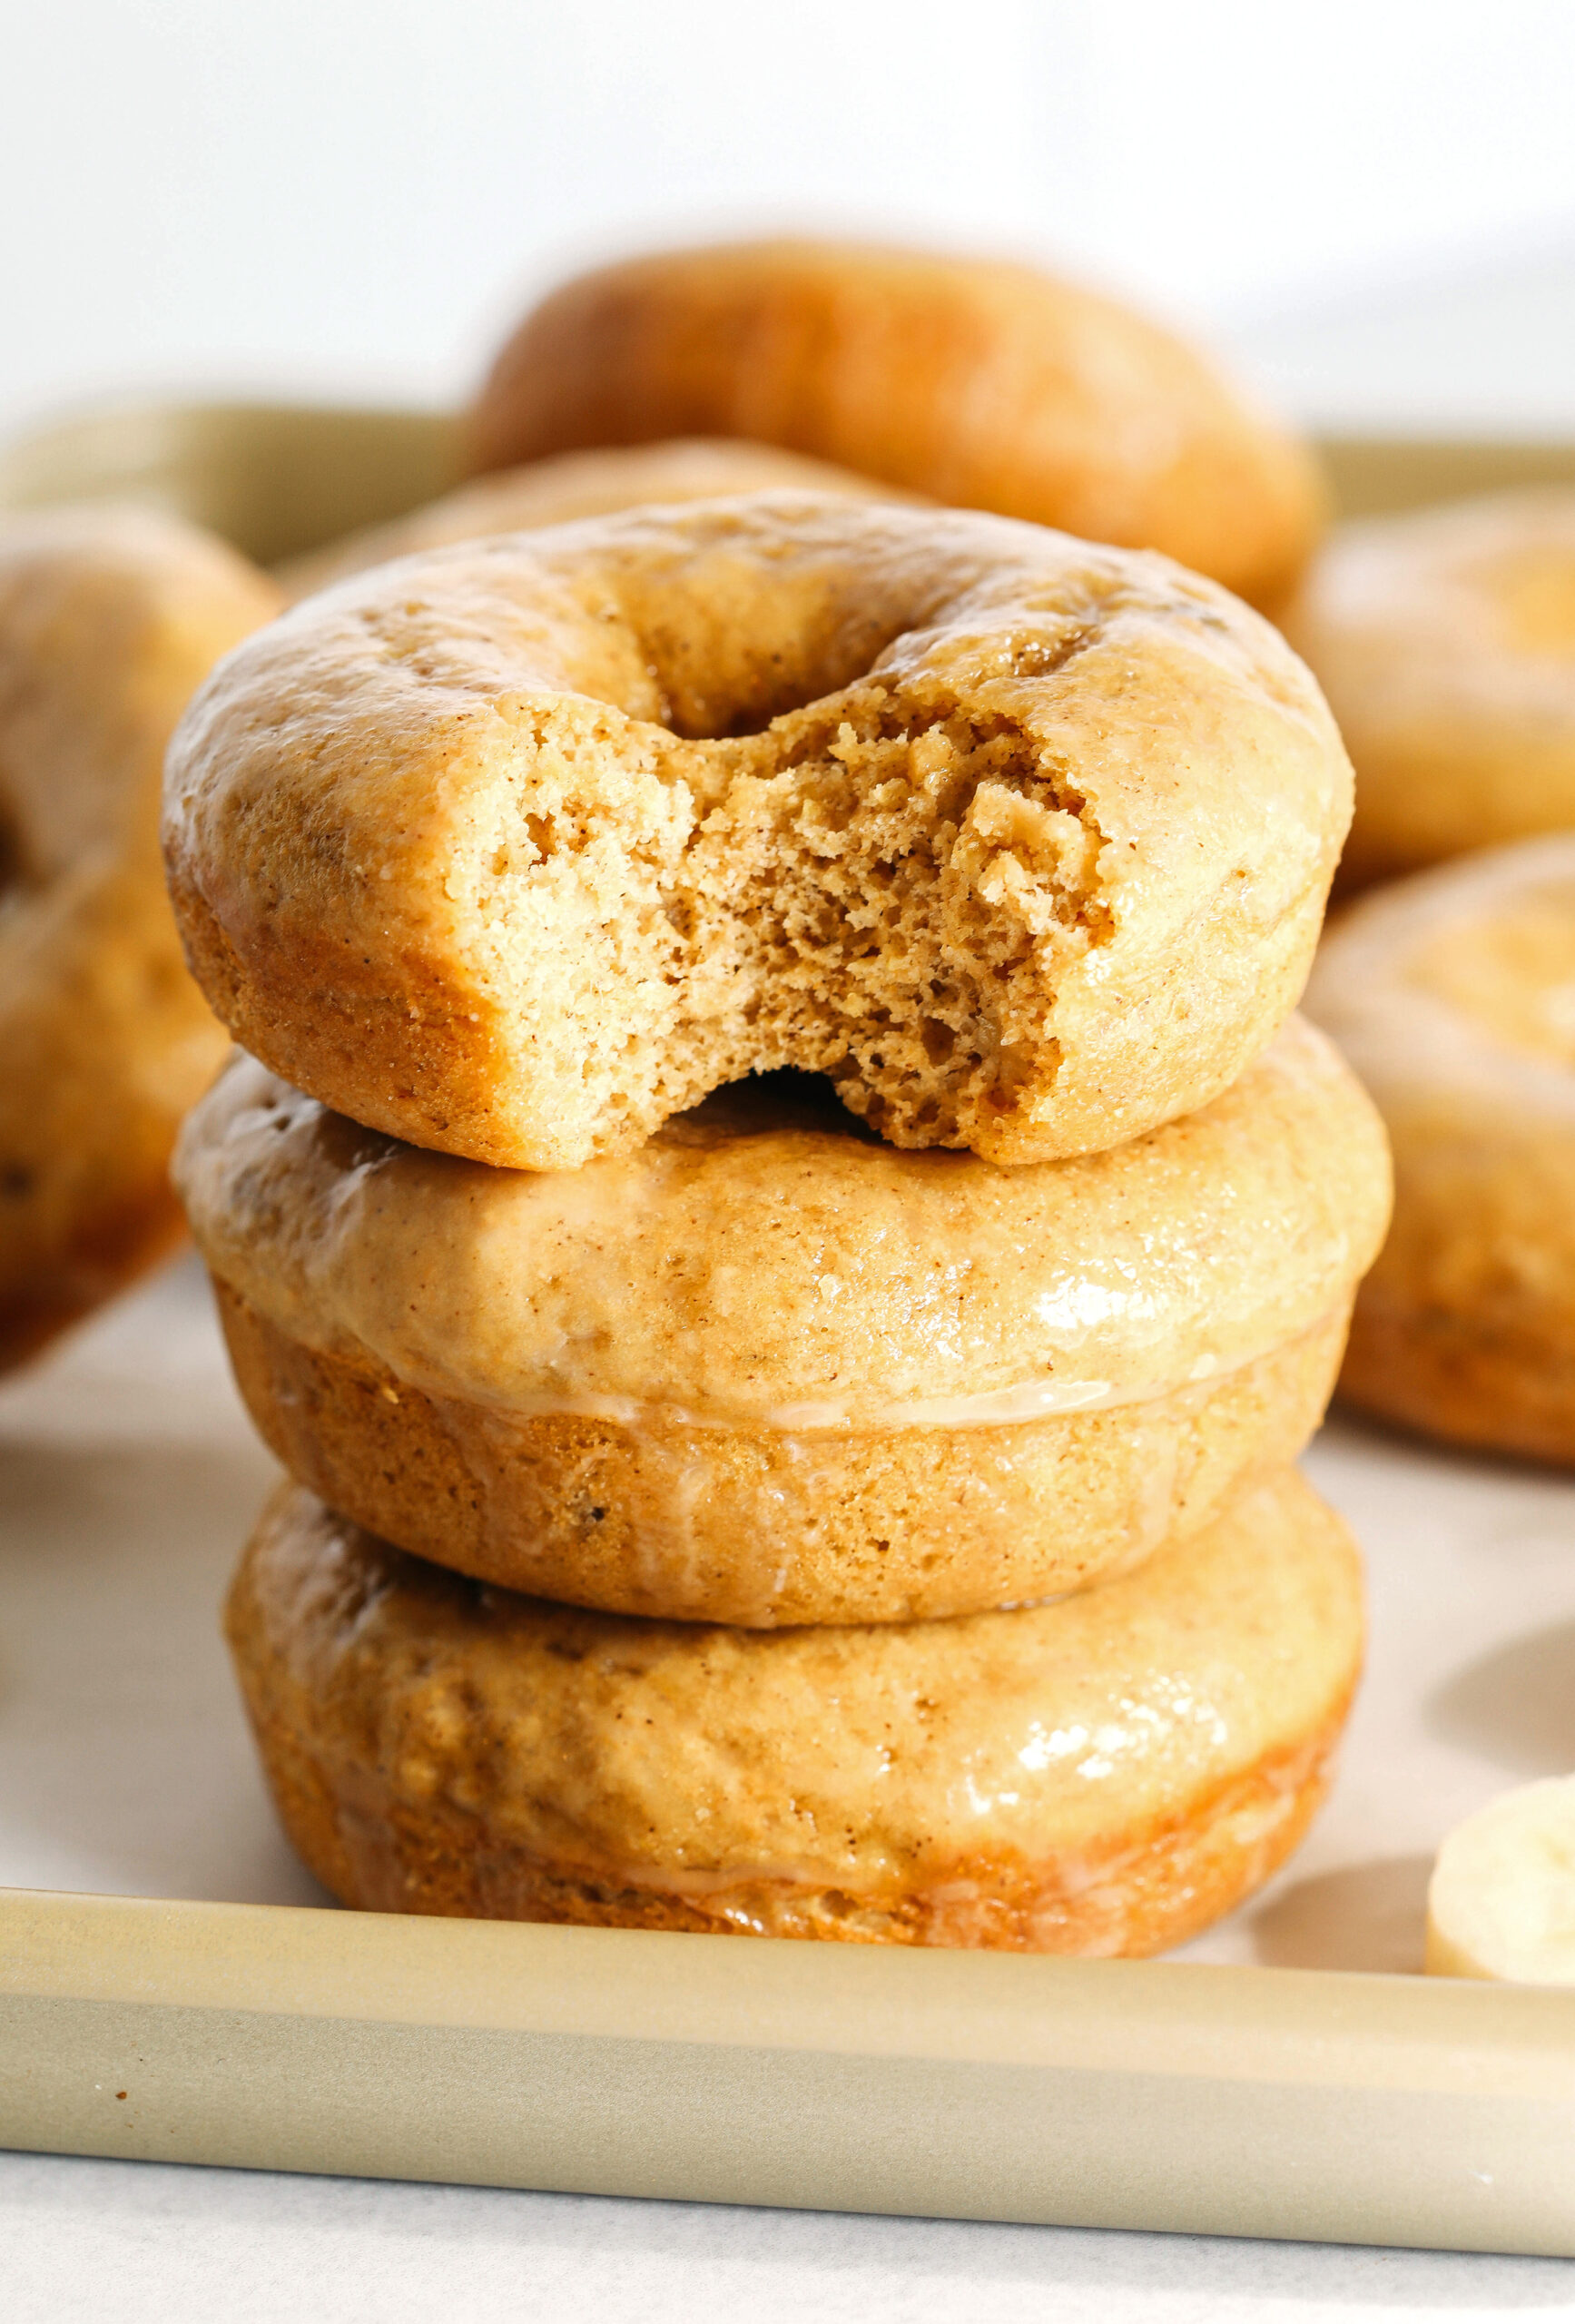 These Baked Banana Bread Donuts are soft, cake-like and made healthier with whole wheat flour, applesauce and zero refined sugar for the perfect morning treat that comes together in just 20 minutes!  Such a great way to use up those overripe bananas!